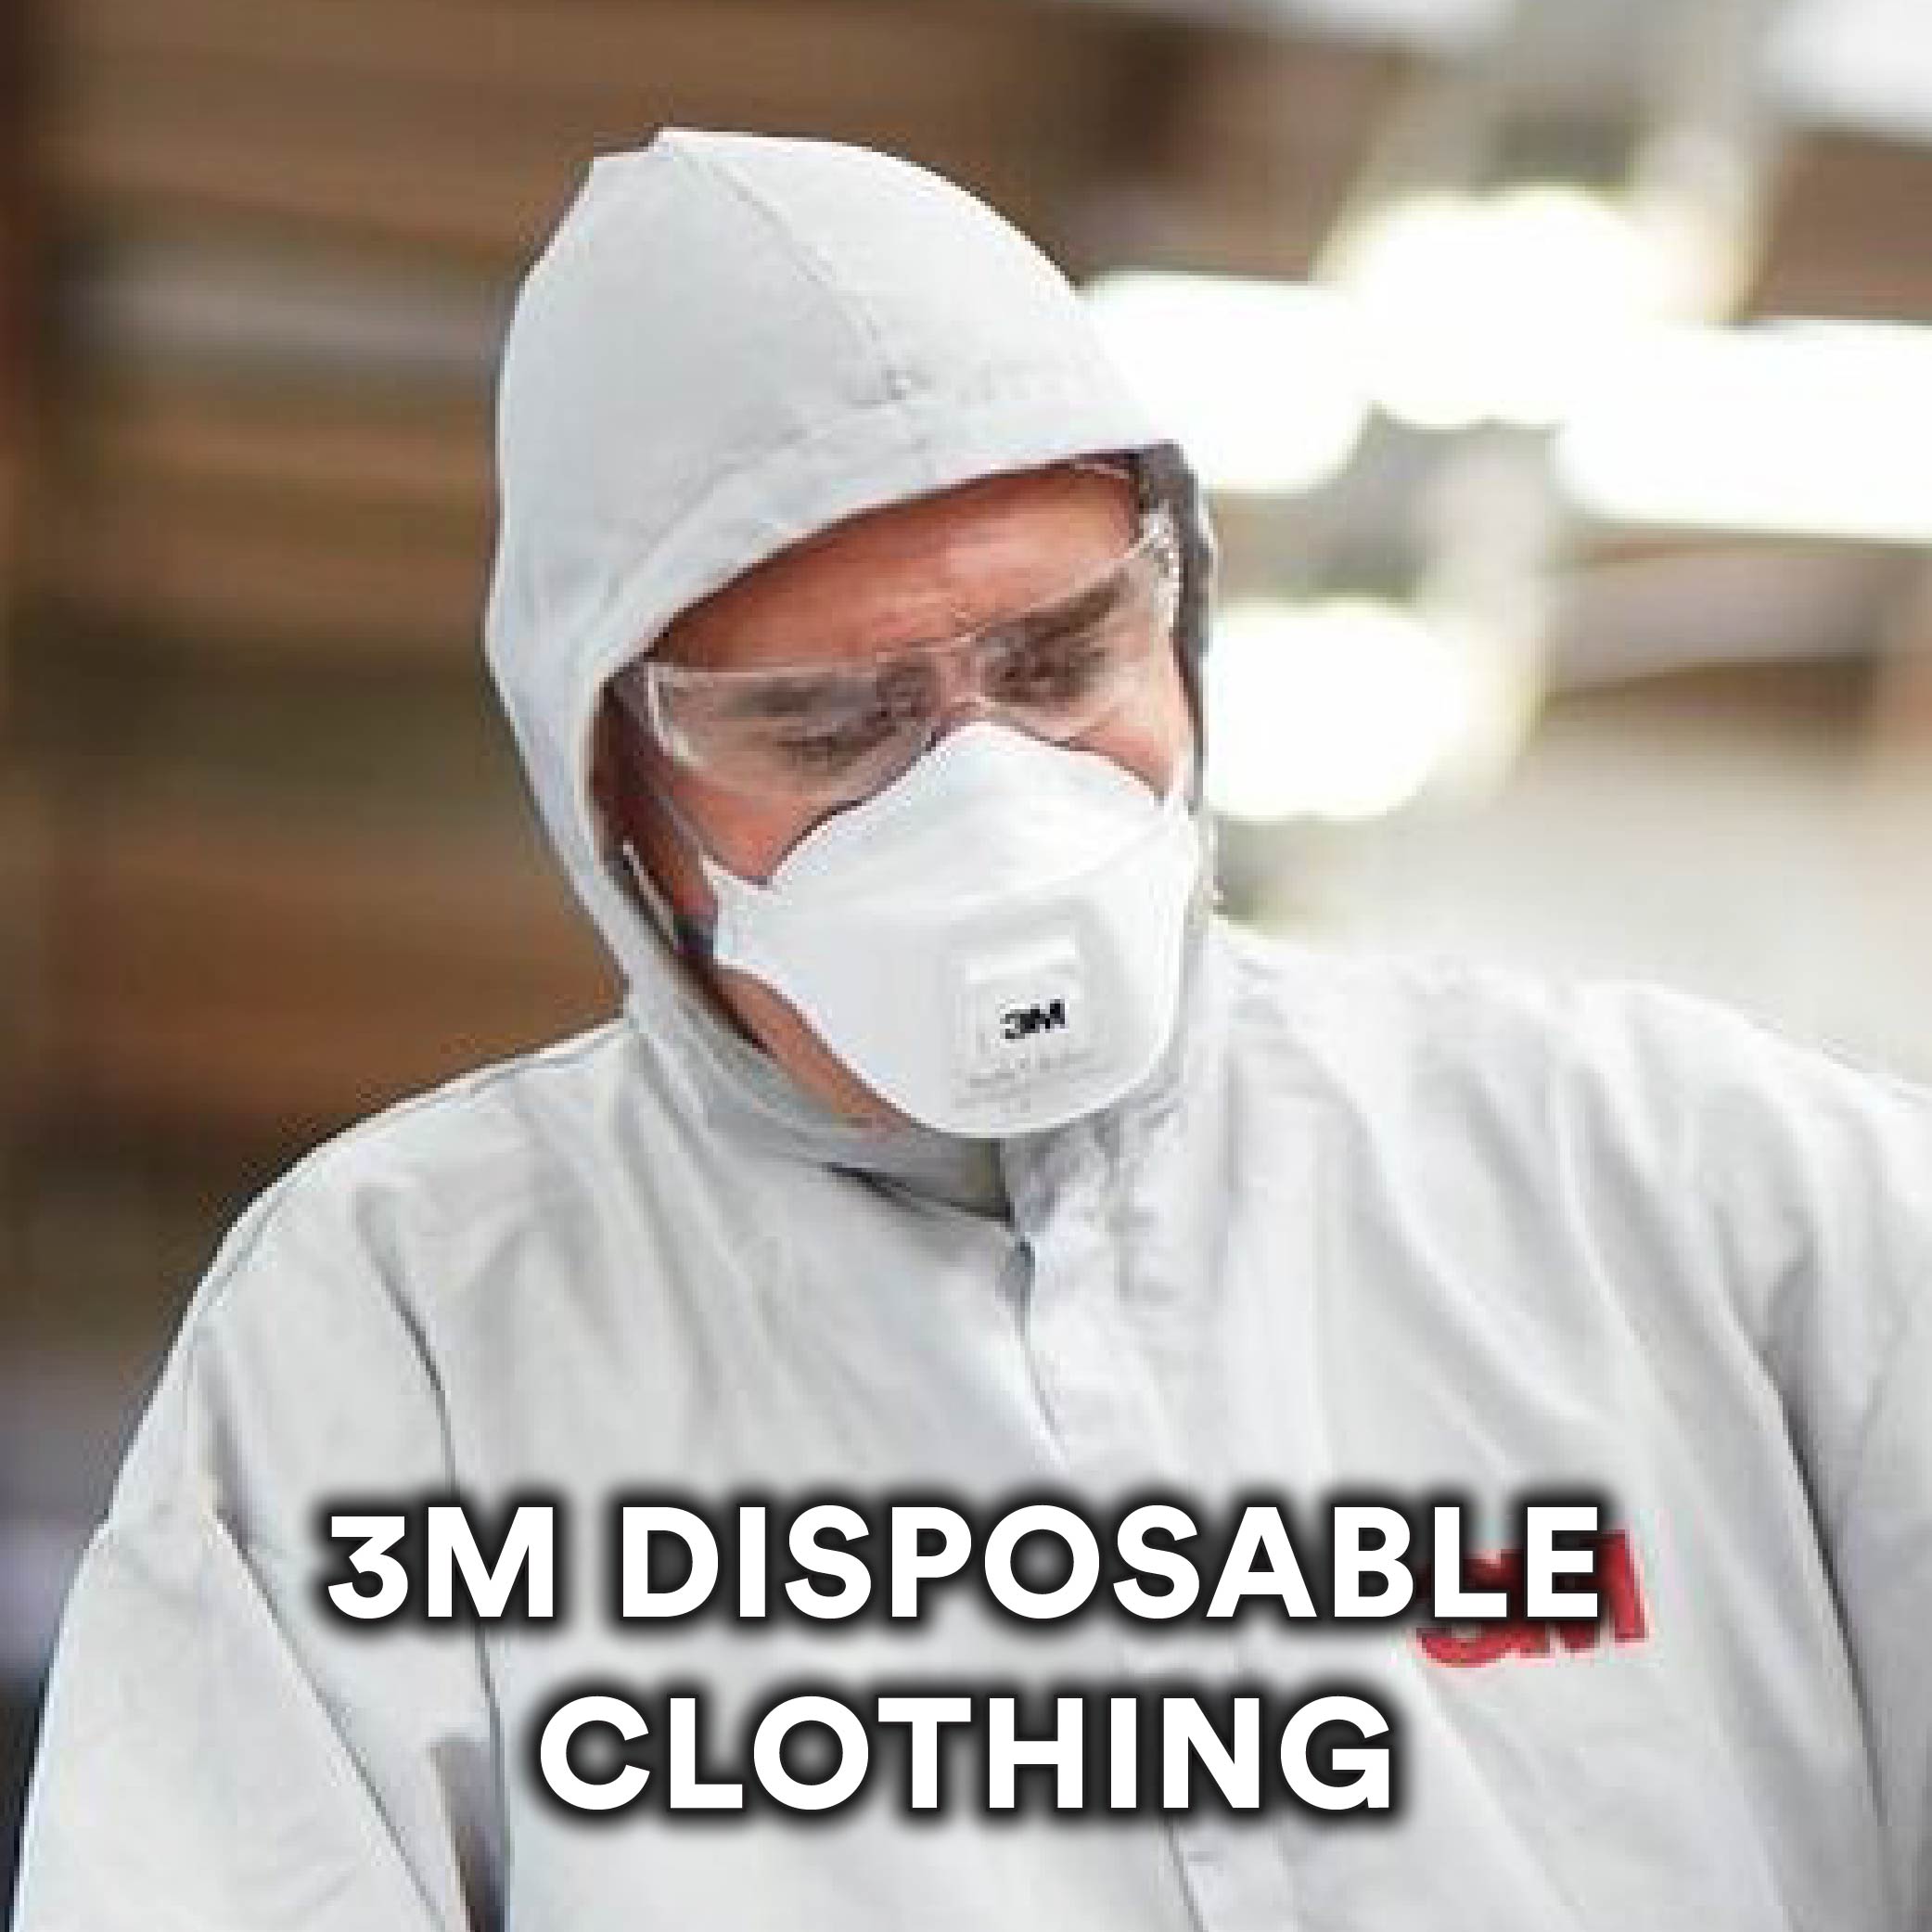 3M Disposable Clothing